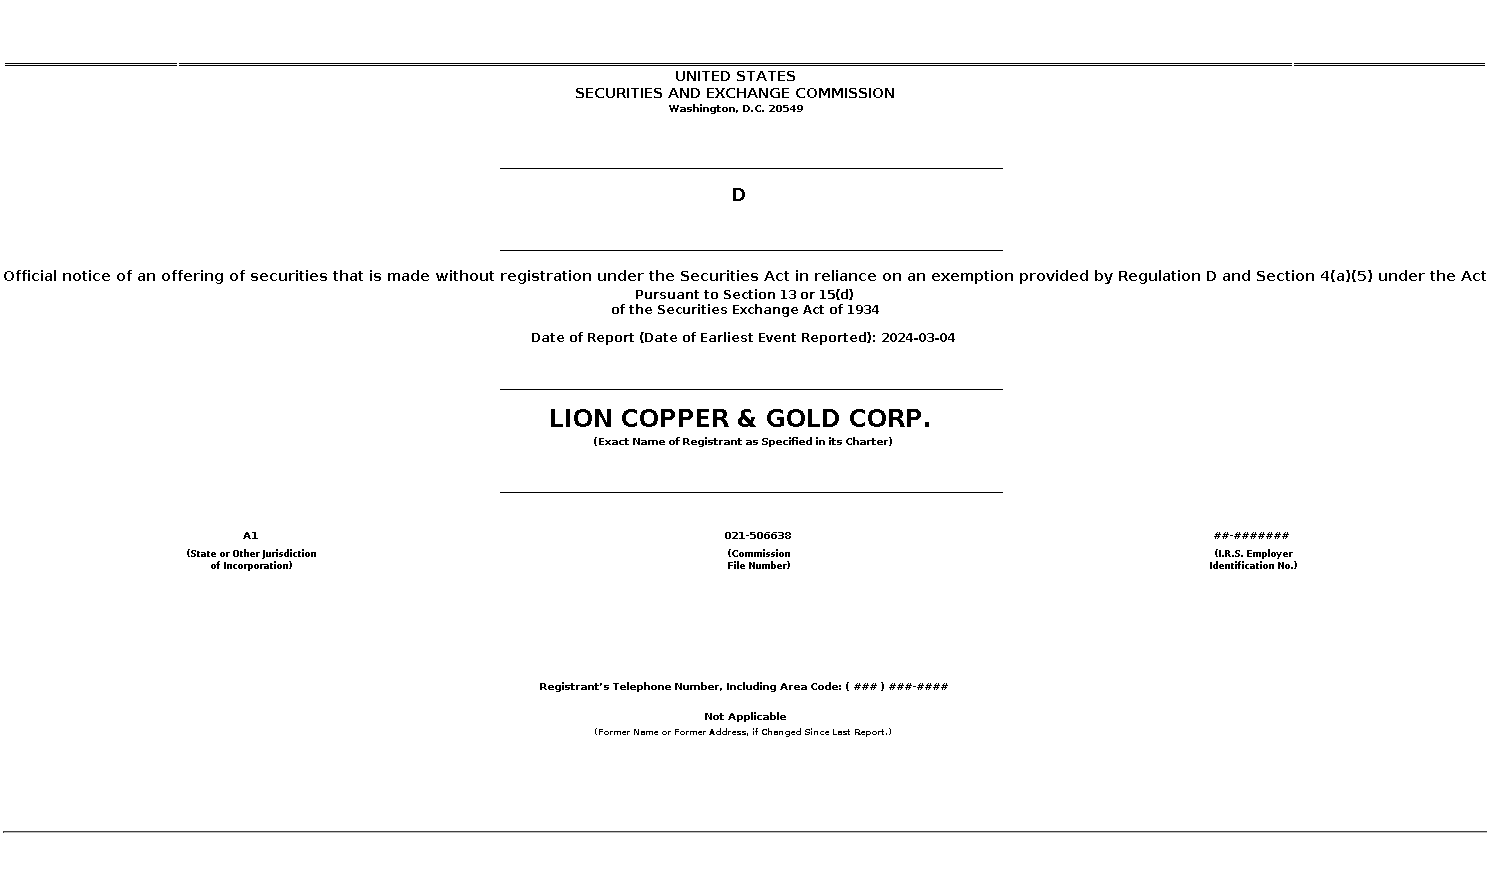 LCGMF : D Official notice of an offering of securities that is made without registration under the Securities Act in reliance on an exemption provided by Regulation D and Section 4(a)(5) under the Act